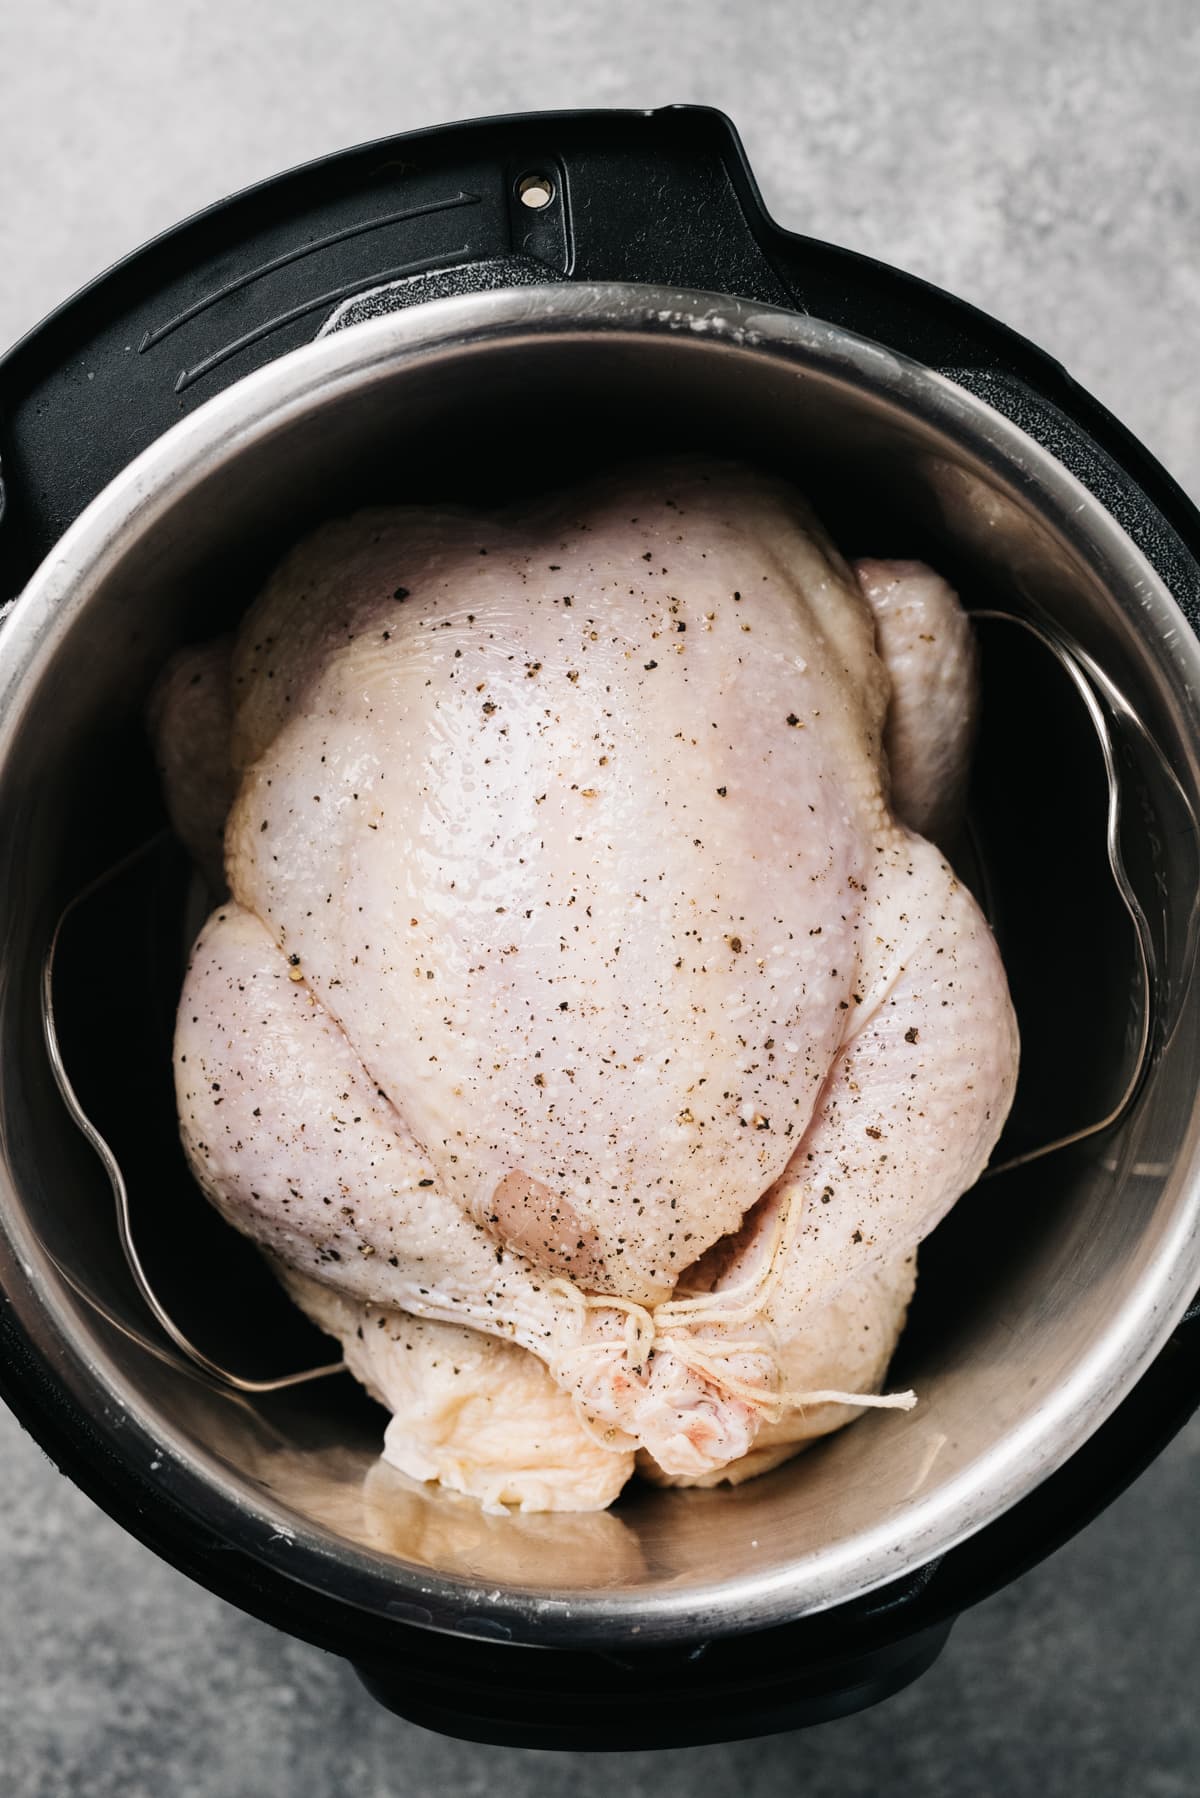 A whole chicken trussed with twine on a trivet in an instant pot.